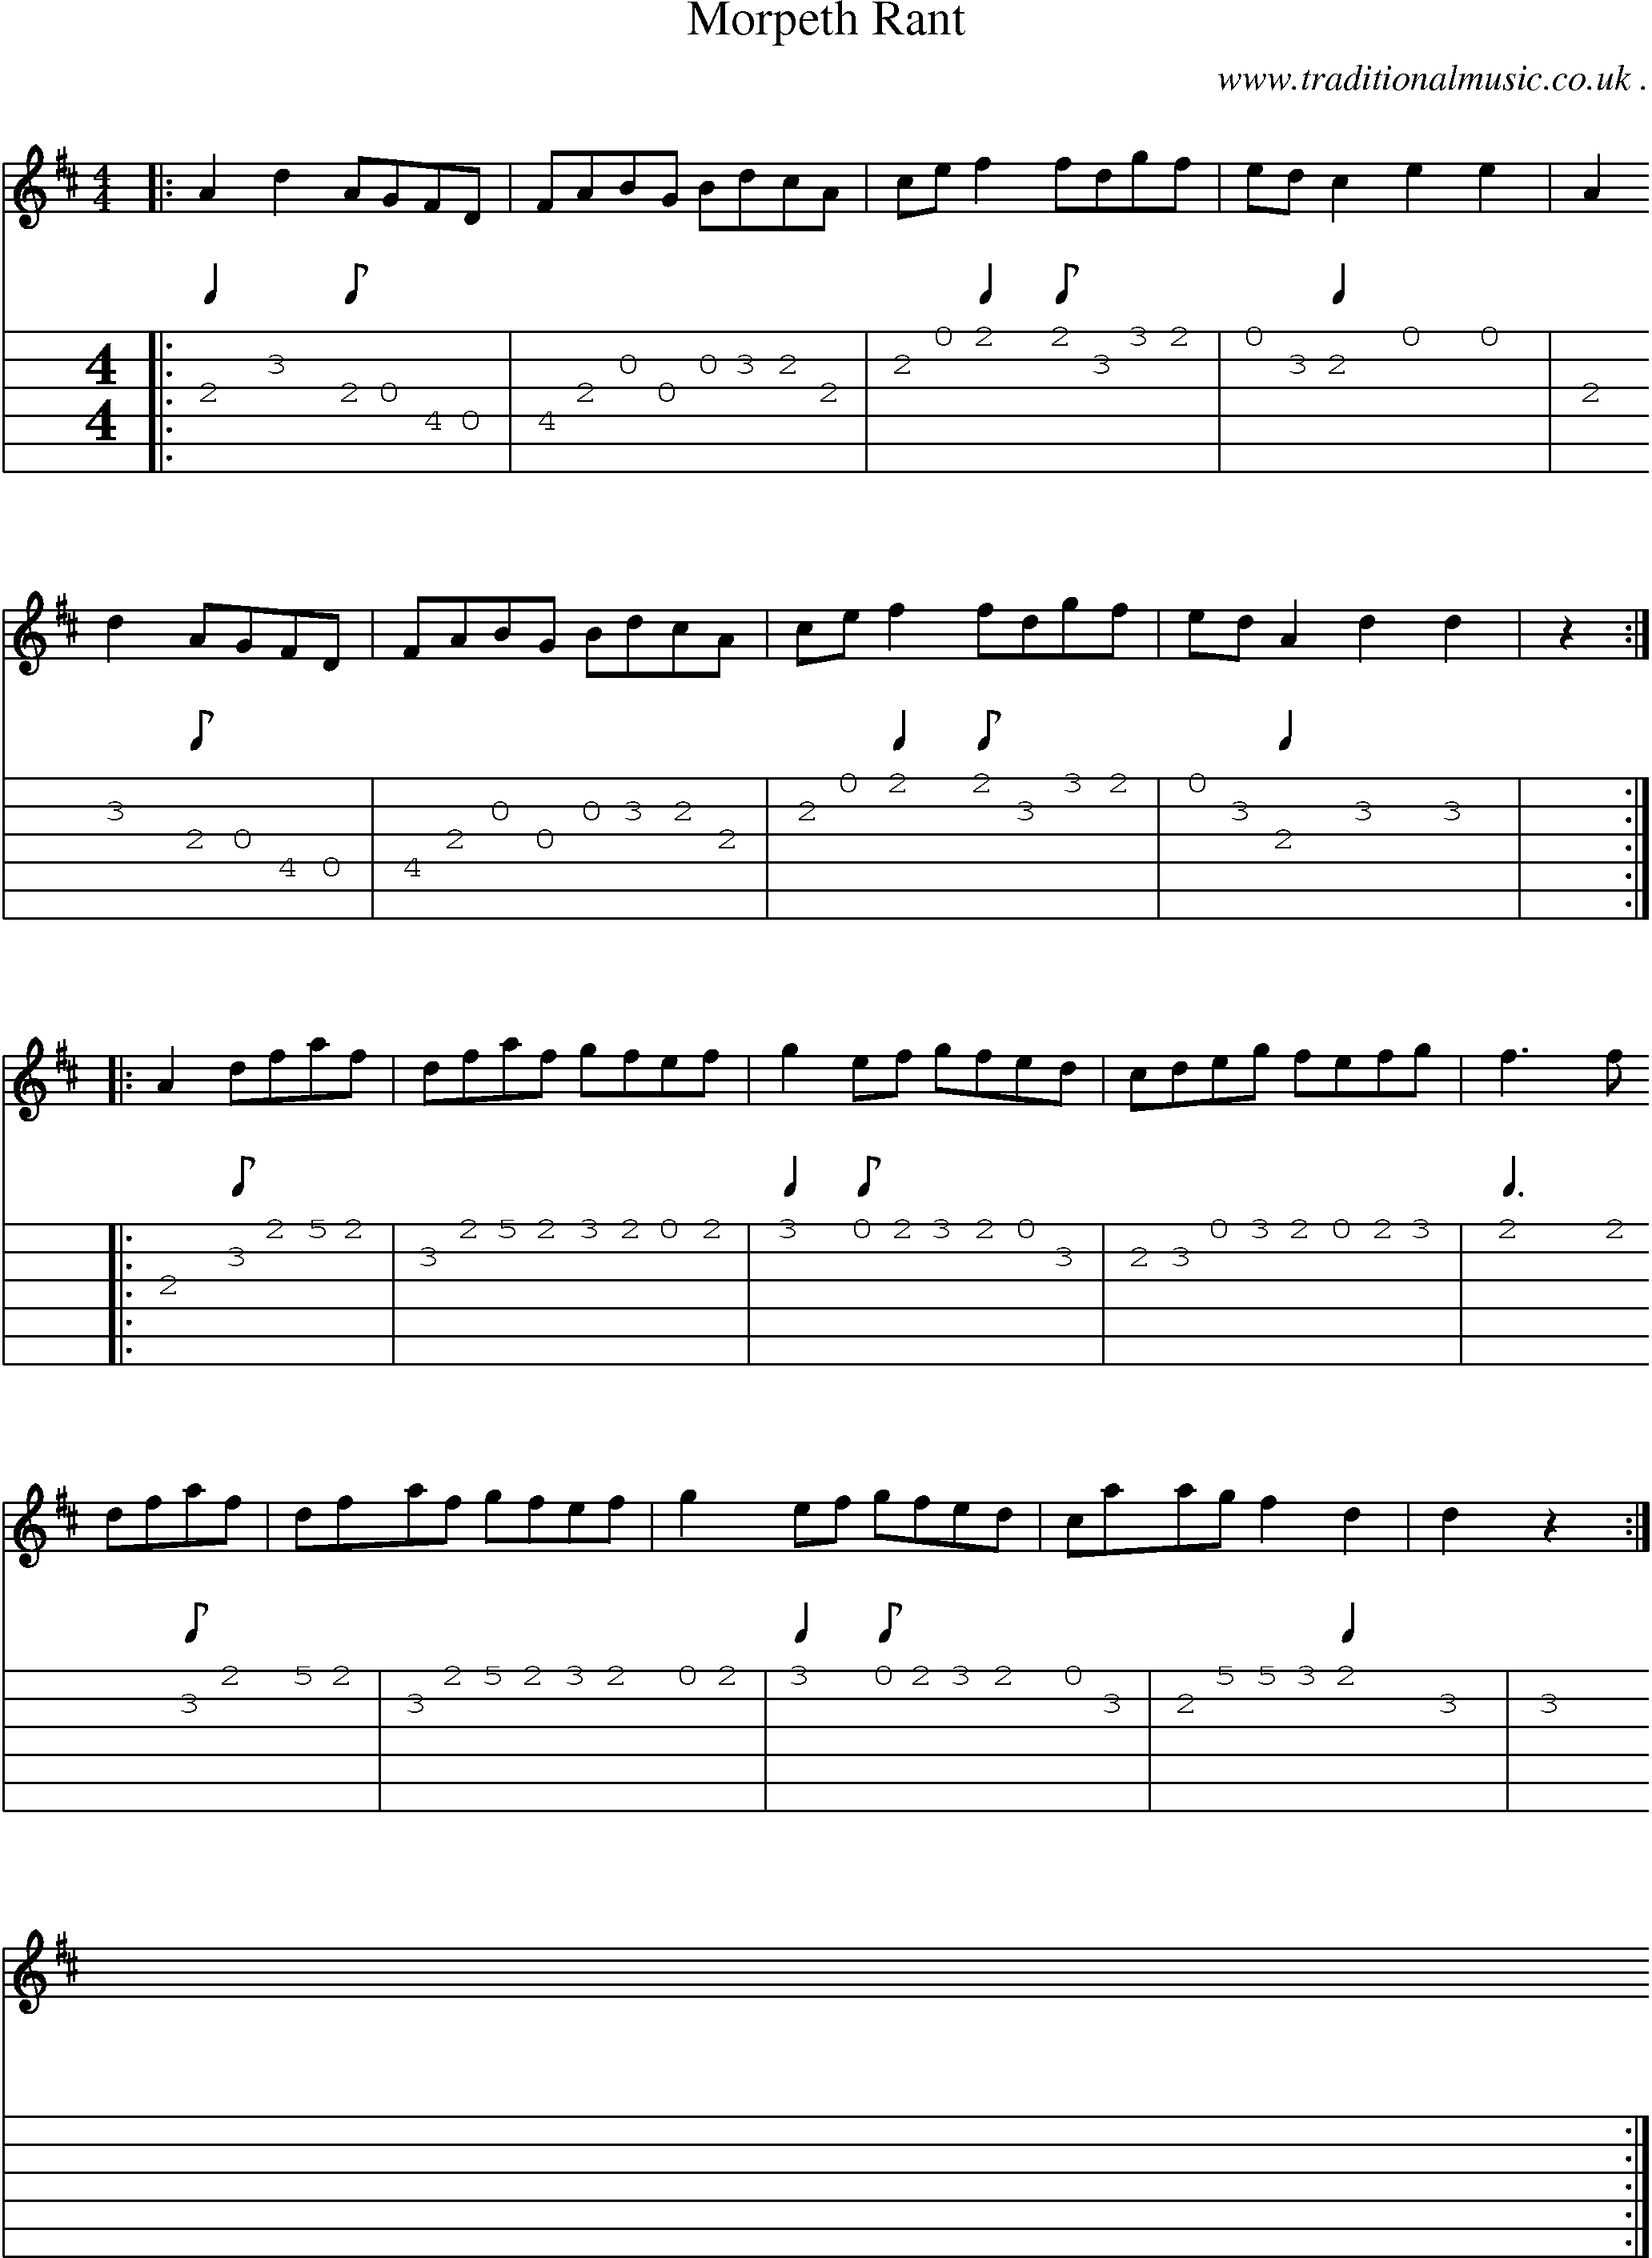 Sheet-music  score, Chords and Guitar Tabs for Morpeth Rant